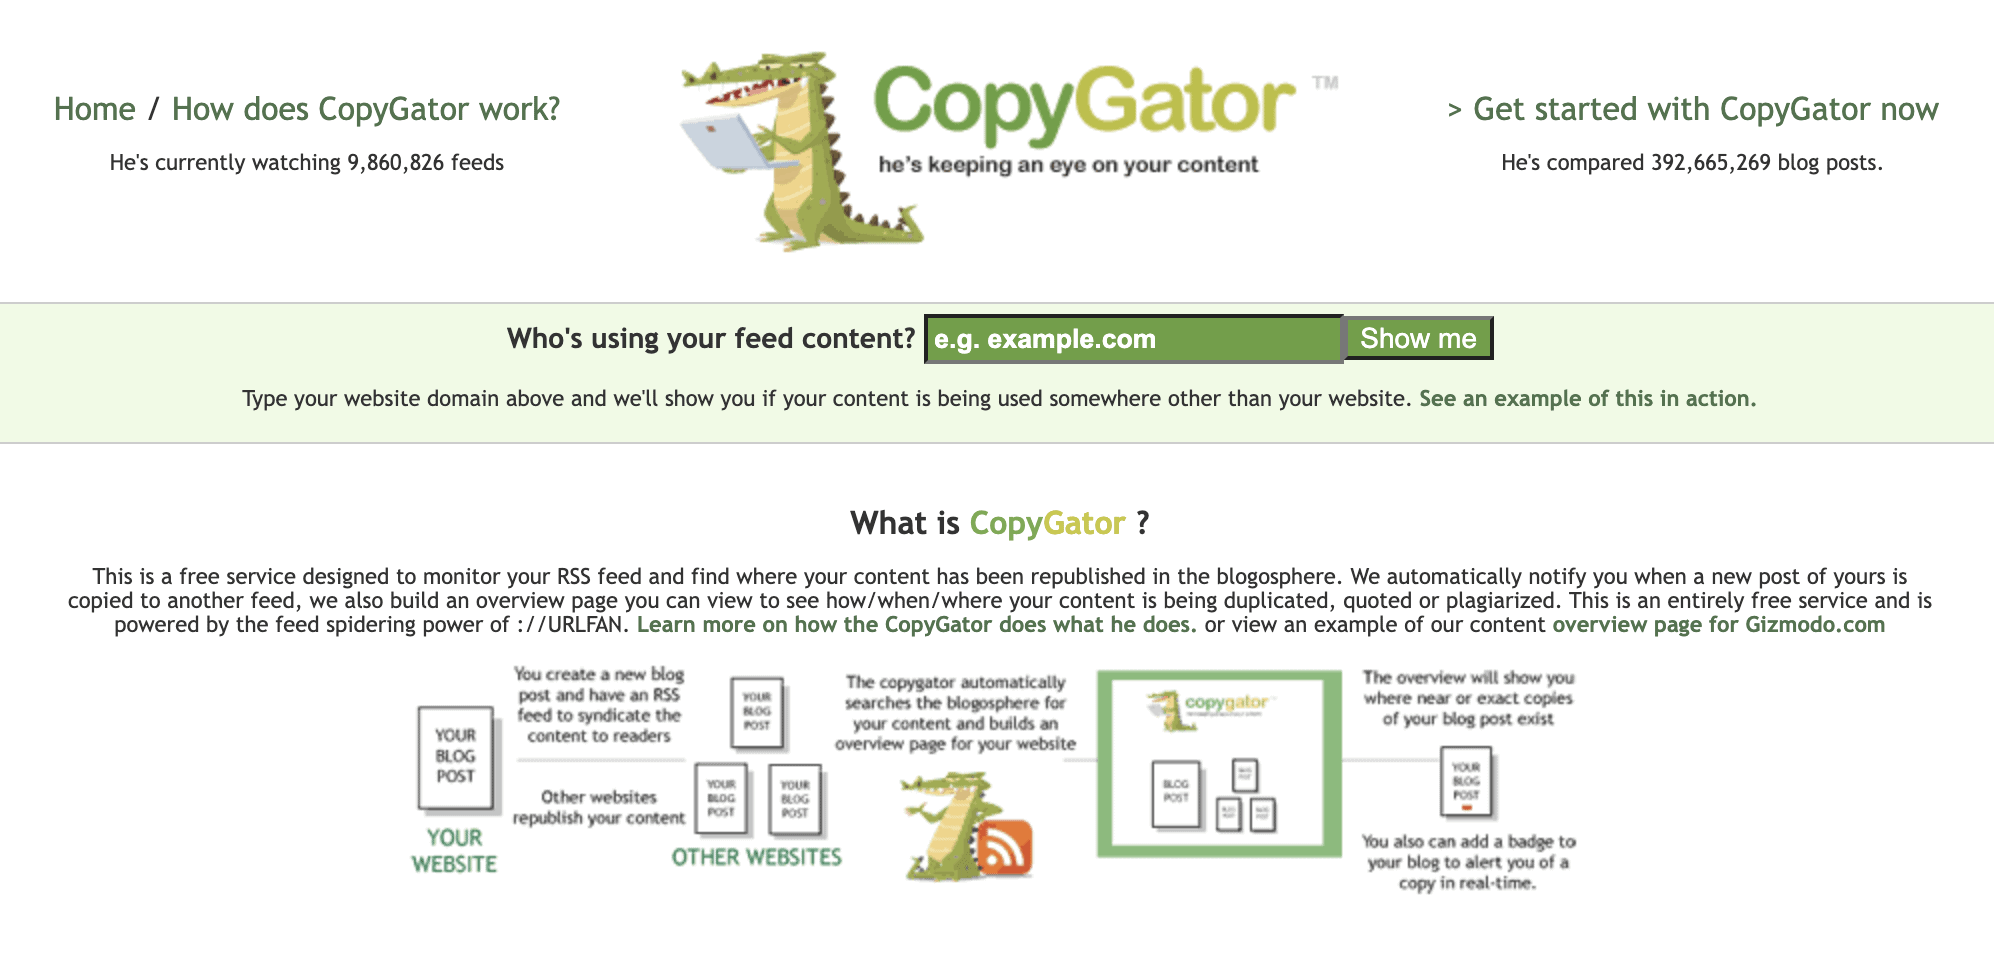 CopyGator: Tool to Find Out if Your Blog Content is Being Copied